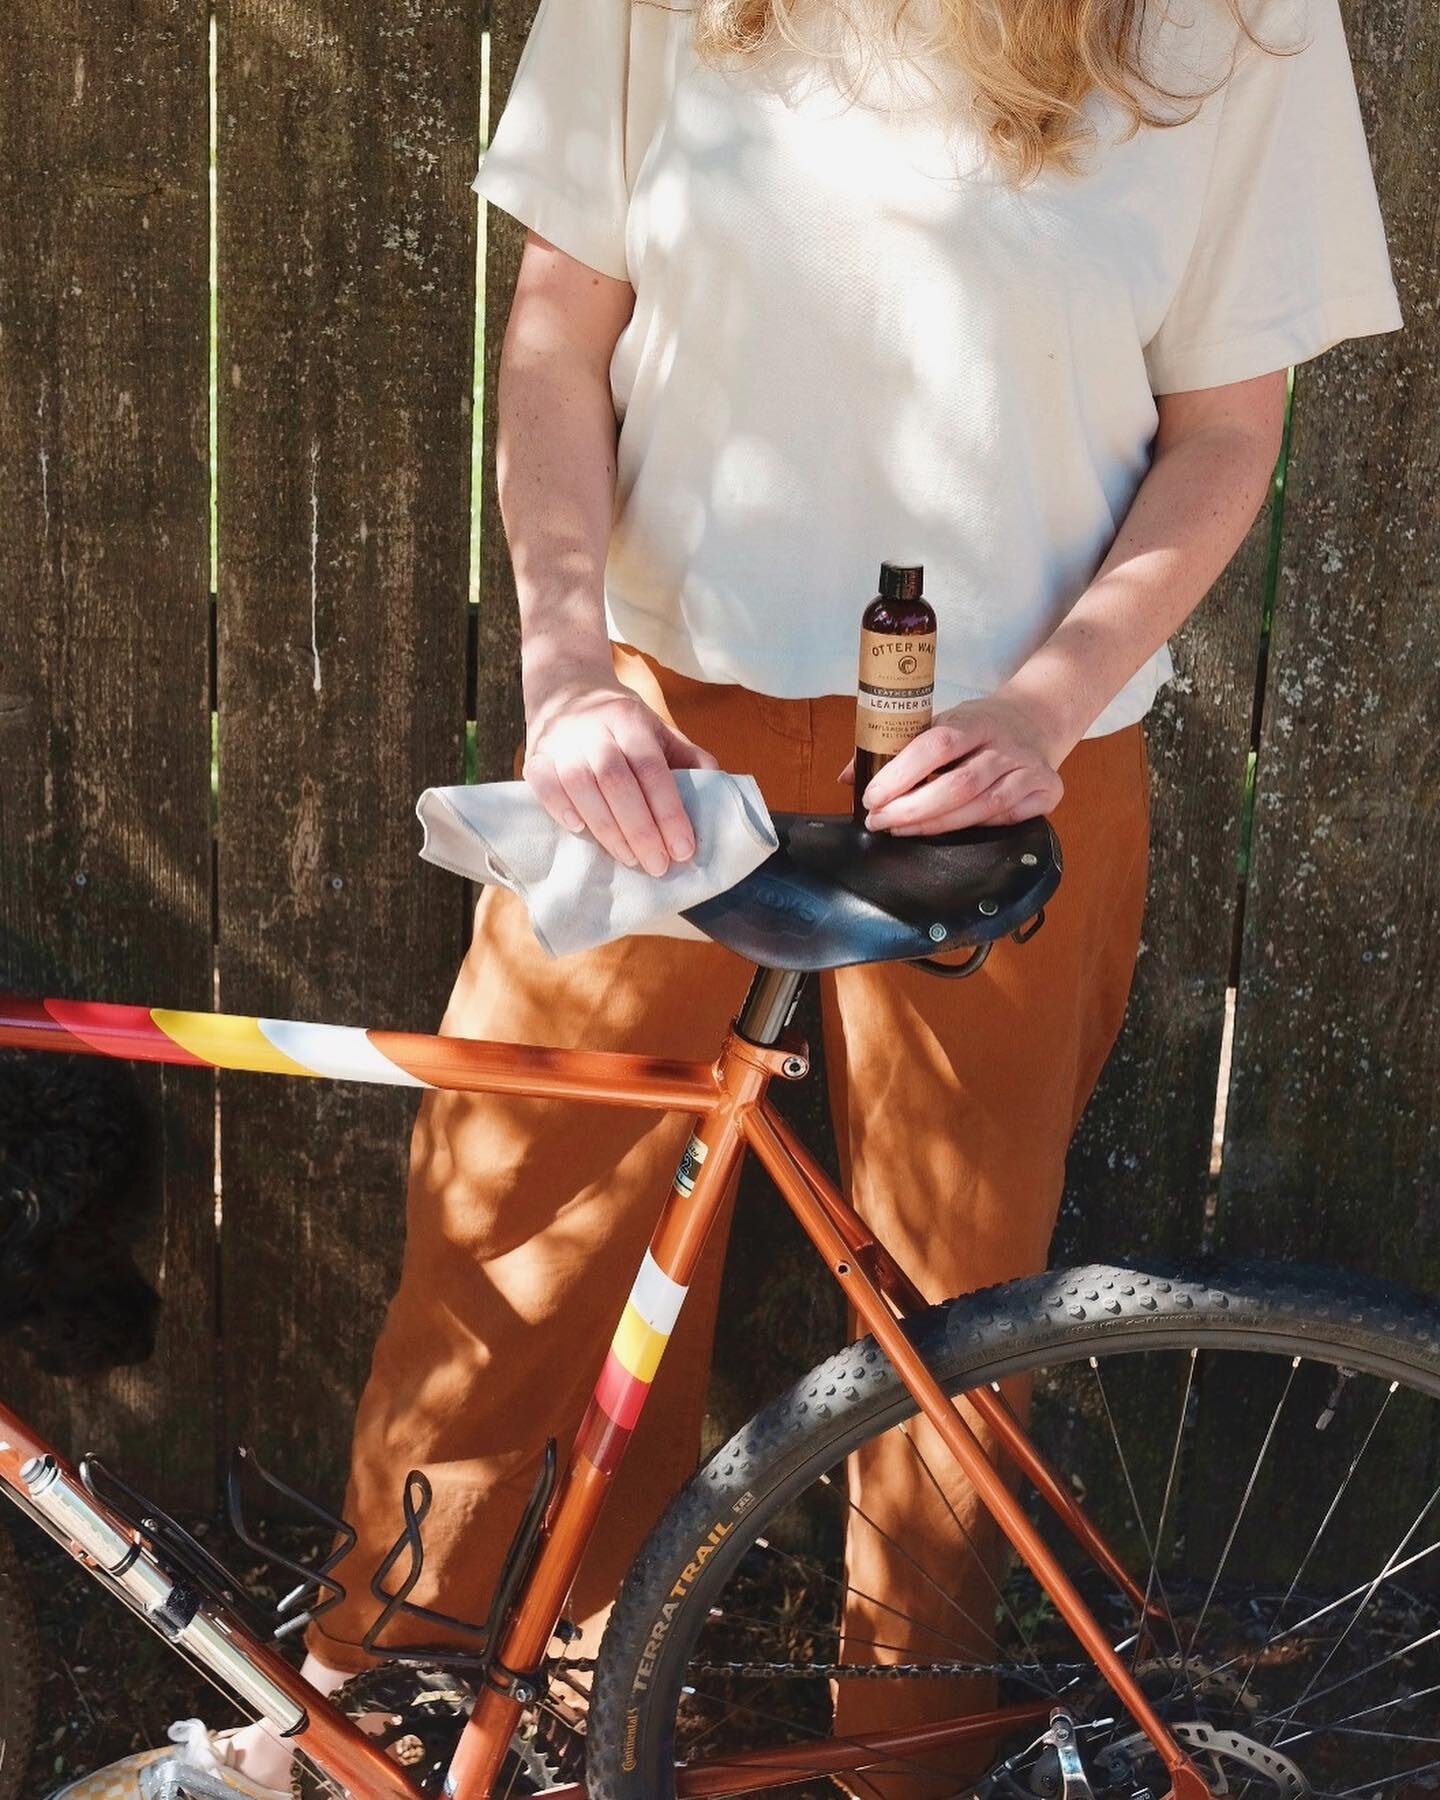 I knew @otterwax made leather and fabric care products for outdoor apparel, but I didn't even think about the fact that their Leather Oil is perfect for leather seat care! ⁠⁠
⁠⁠
Good timing to give those saddles some extra love, as @pdxwnbr has annou